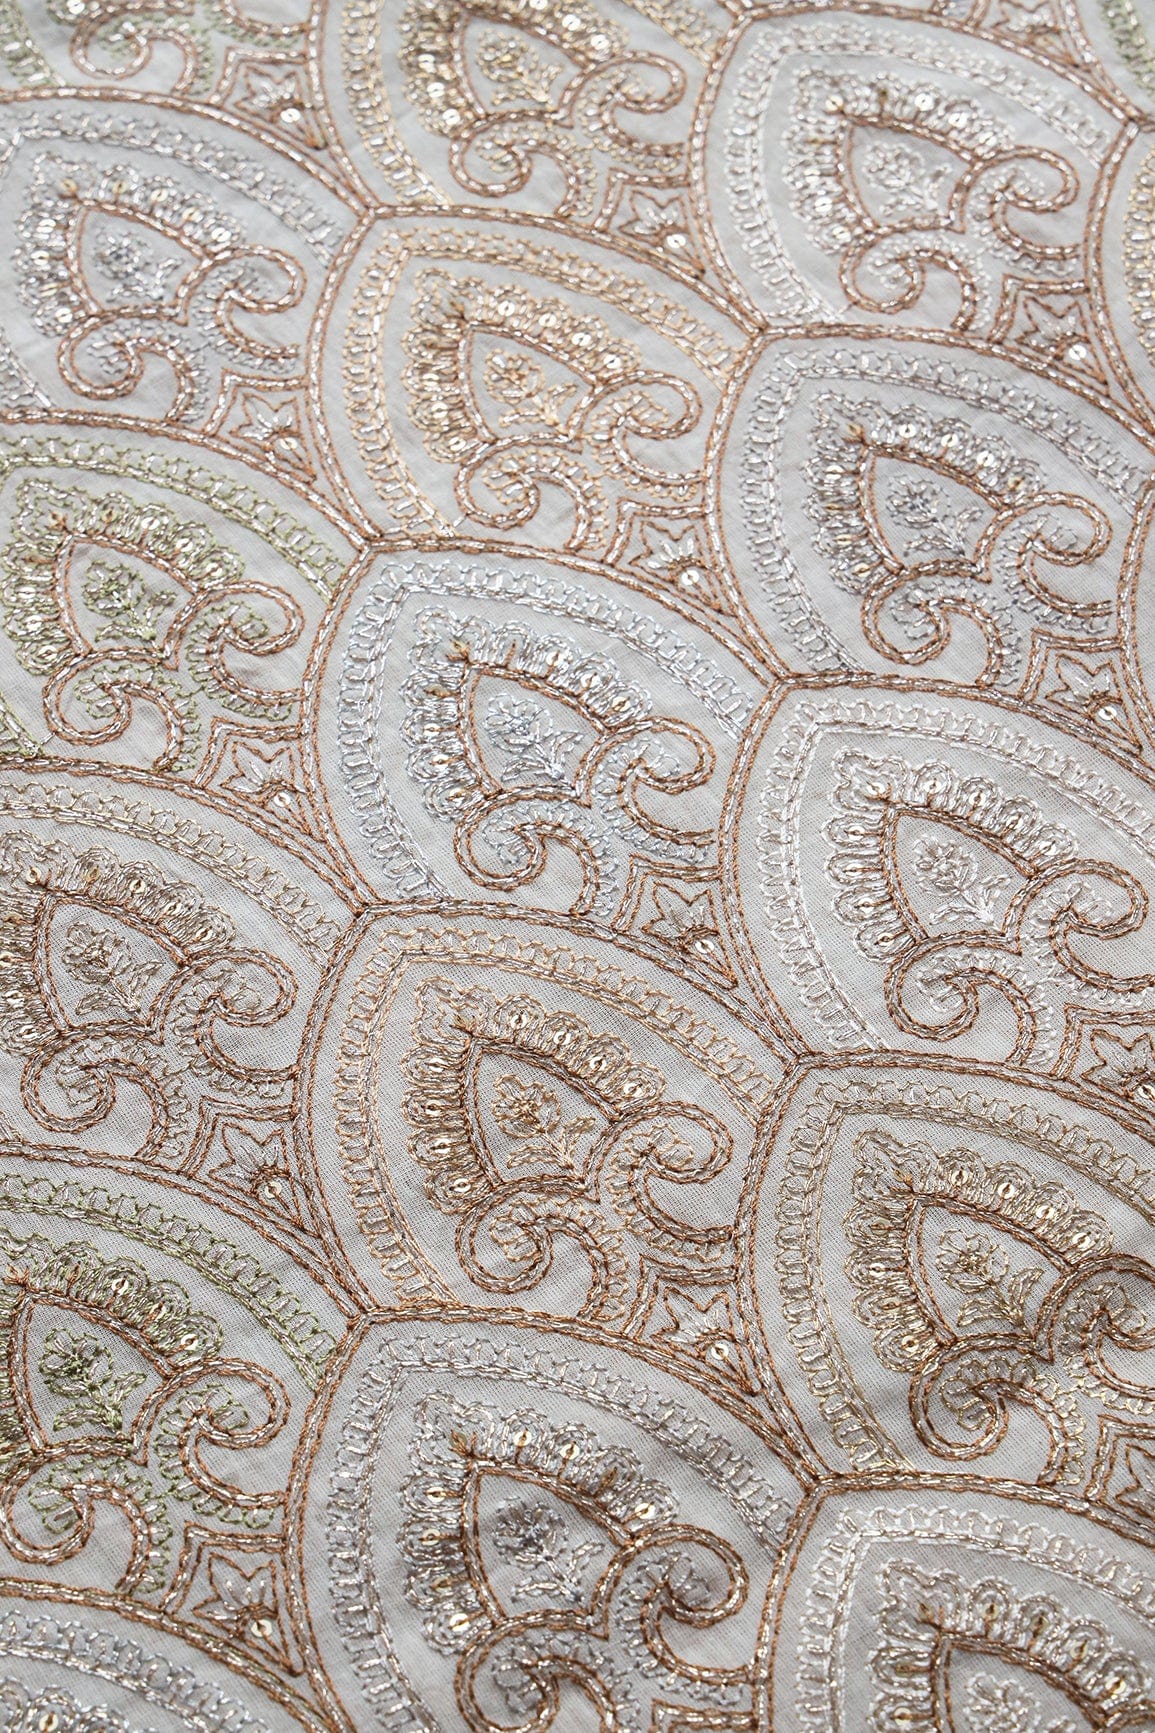 doeraa Embroidery Fabrics Brown Thread With Zari And Gold Sequins Trellis Embroidery On Off White Organic Cotton Fabric